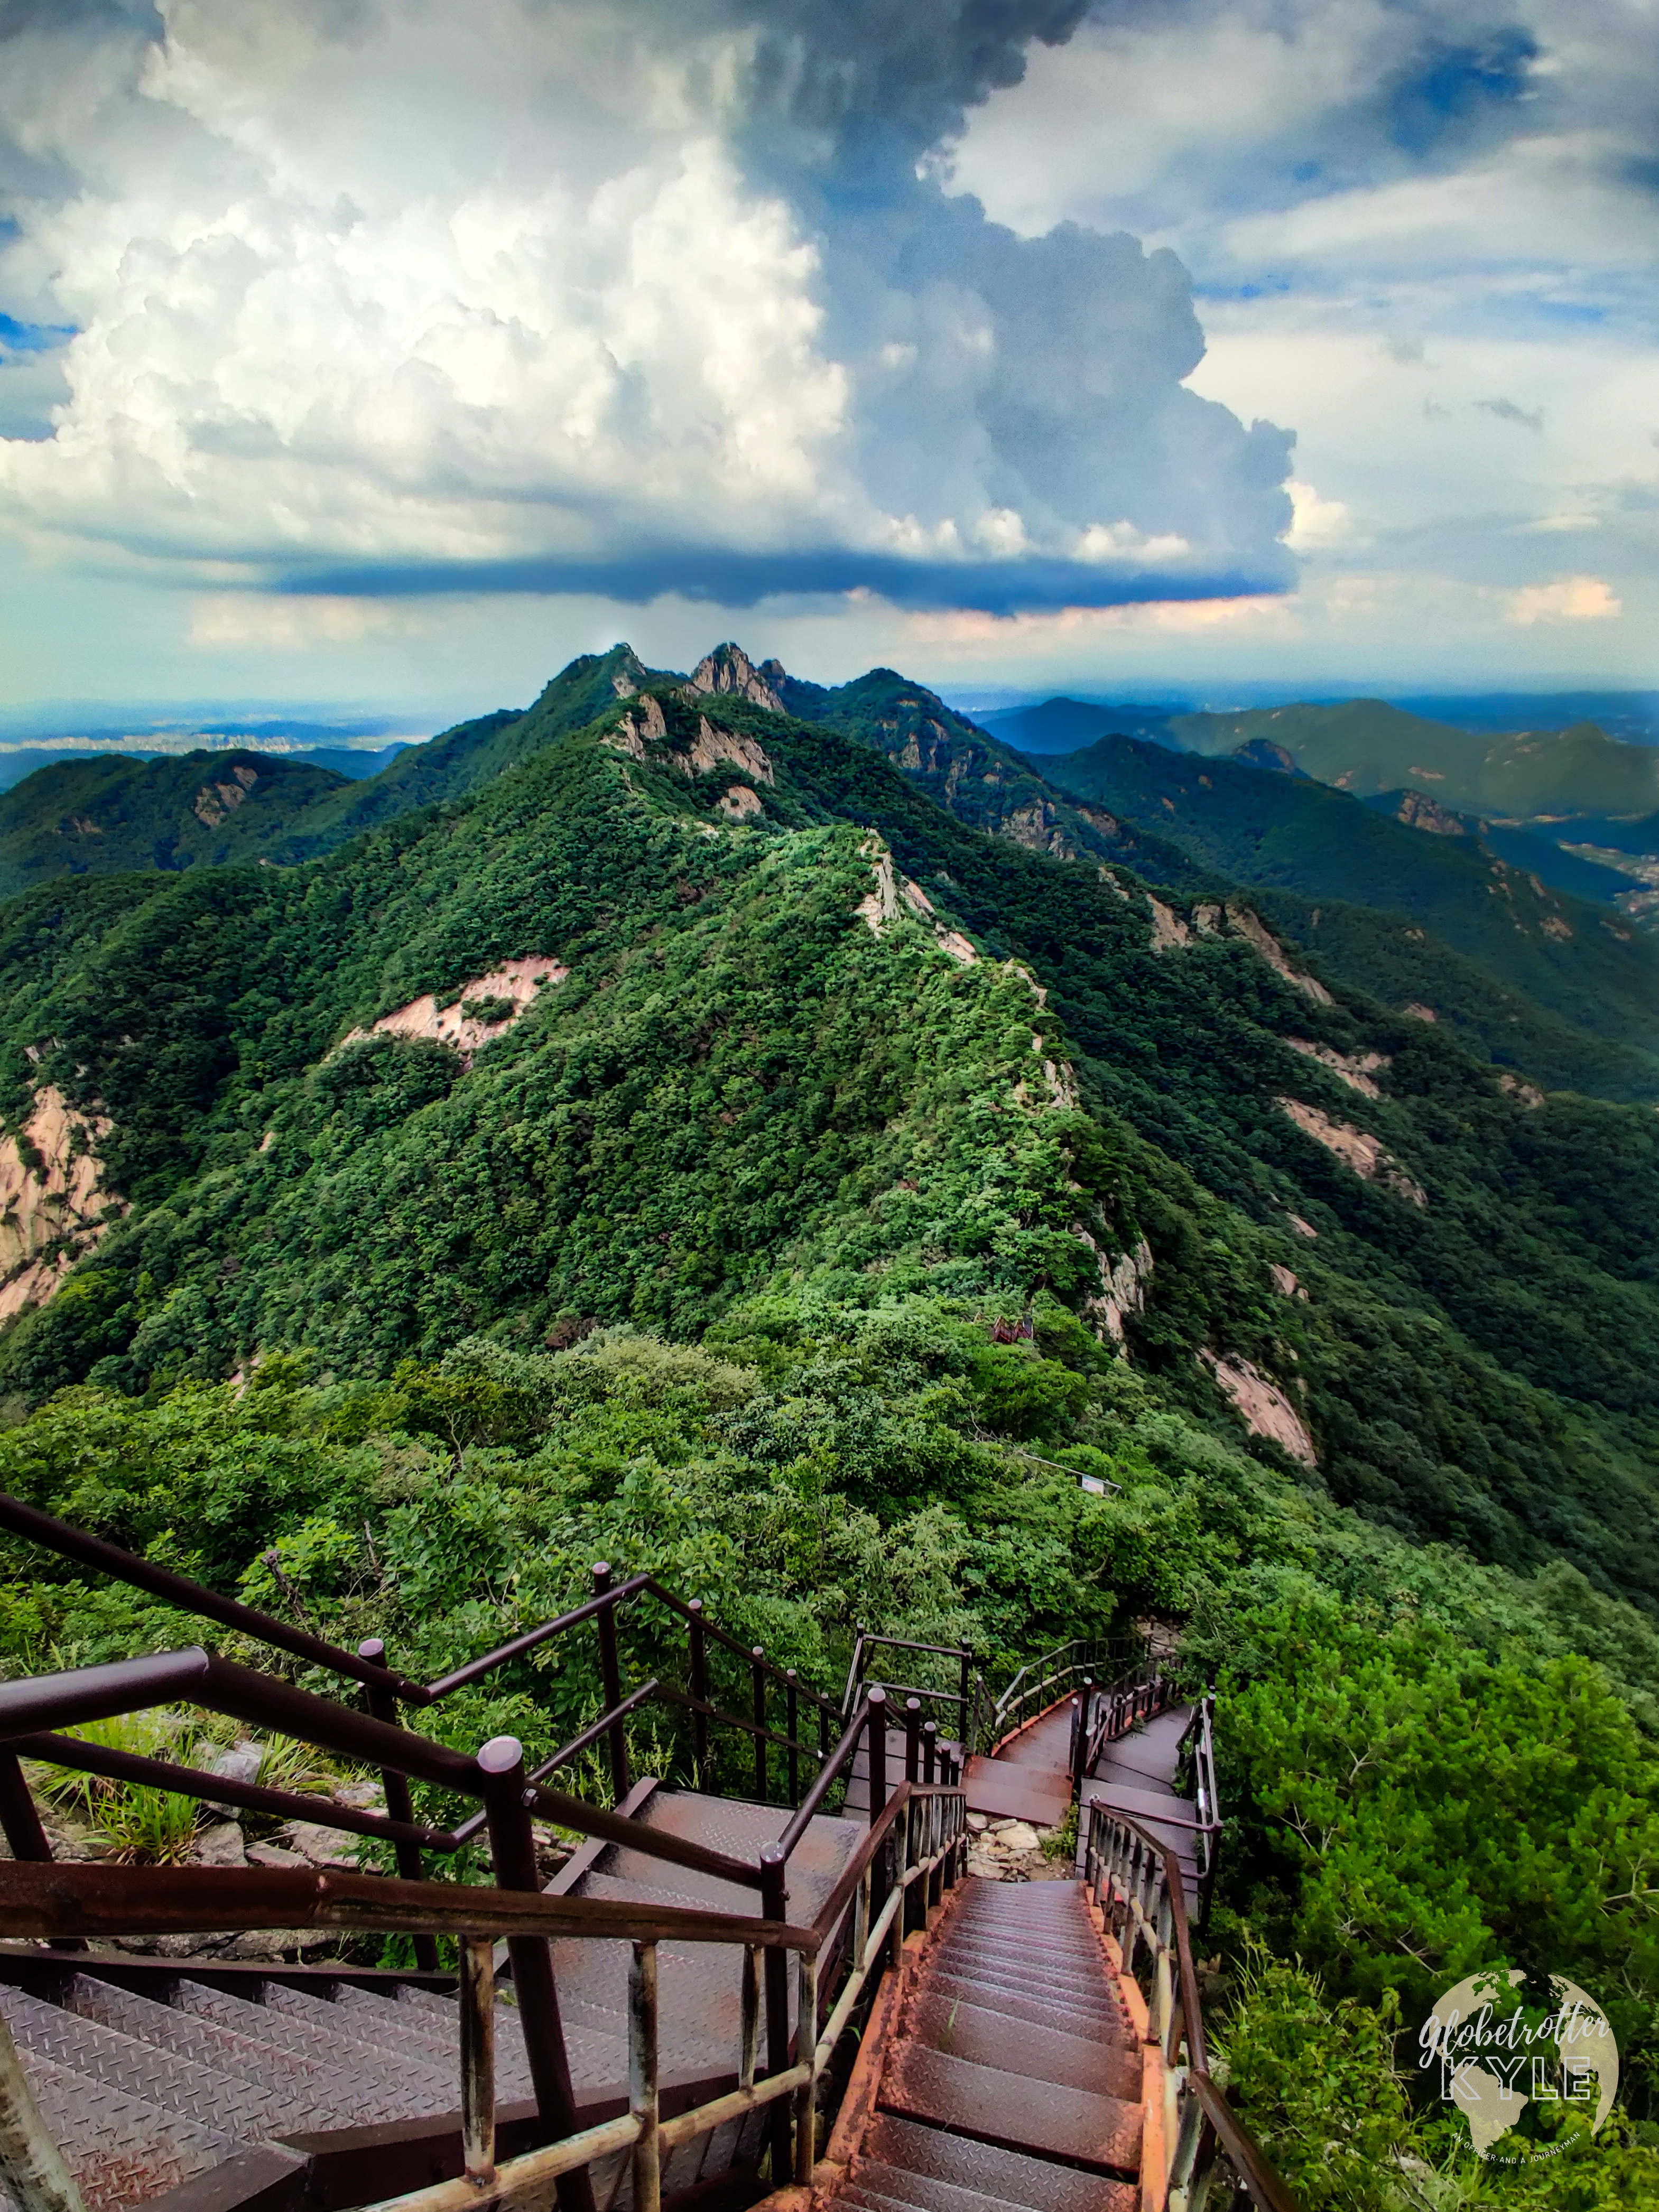 a rugged mountainous ridgeline made of tan rock struggles to appear through lush trees and foliage next to a valley as a massive thunderhead is building far in the distance over the mountains of South Korea